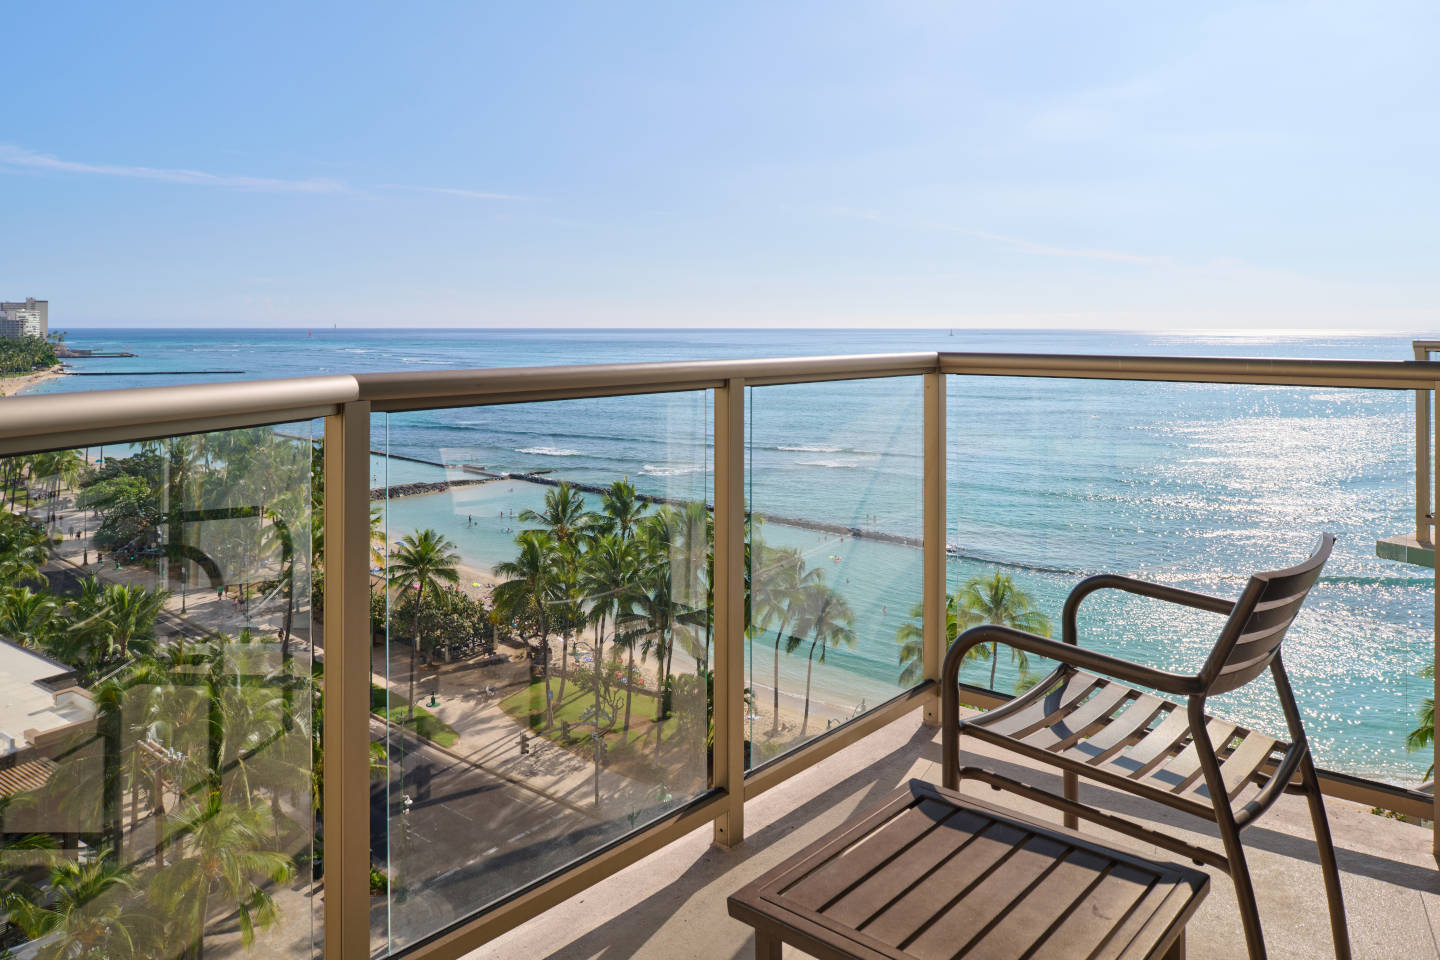 Ocean View Room Balcony with seating to enjoy the views of Waikiki Beach